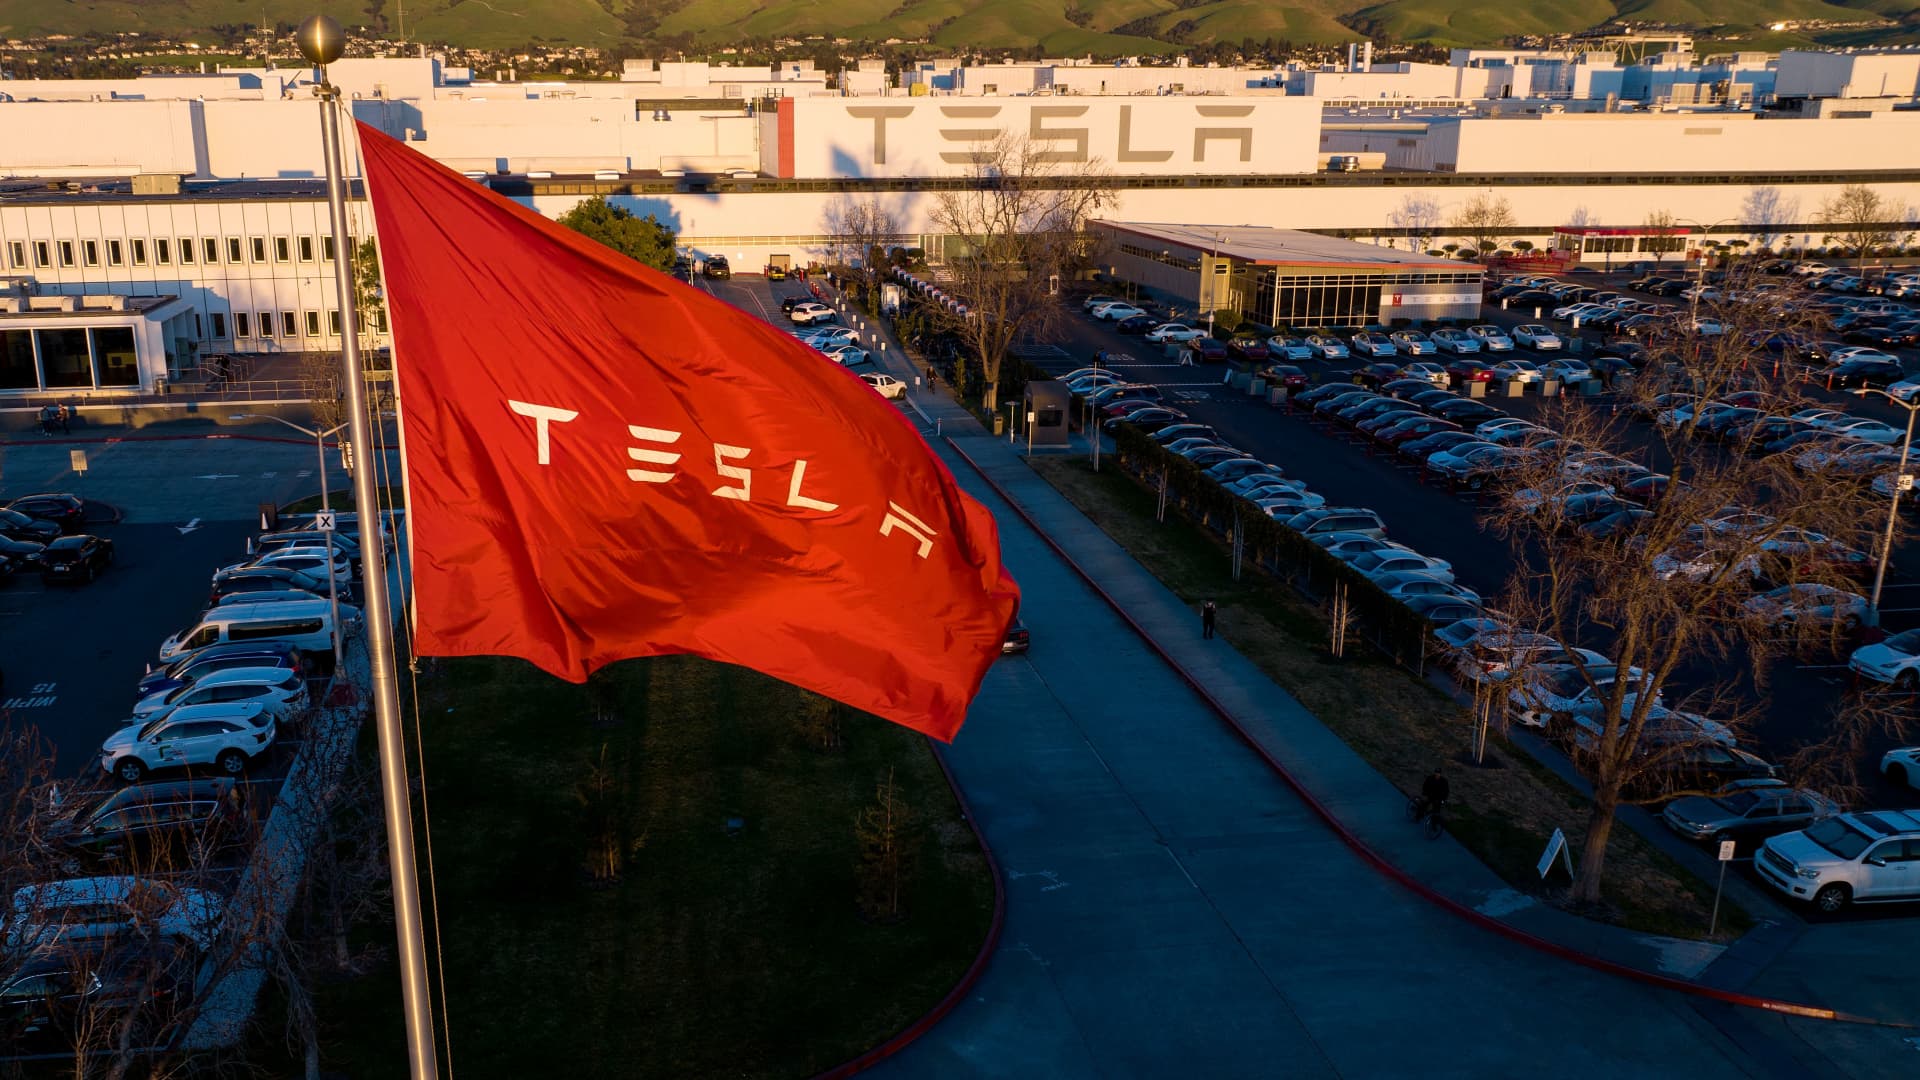 Tesla ban on pro-union shirts violated staff’ rights, labor board rules